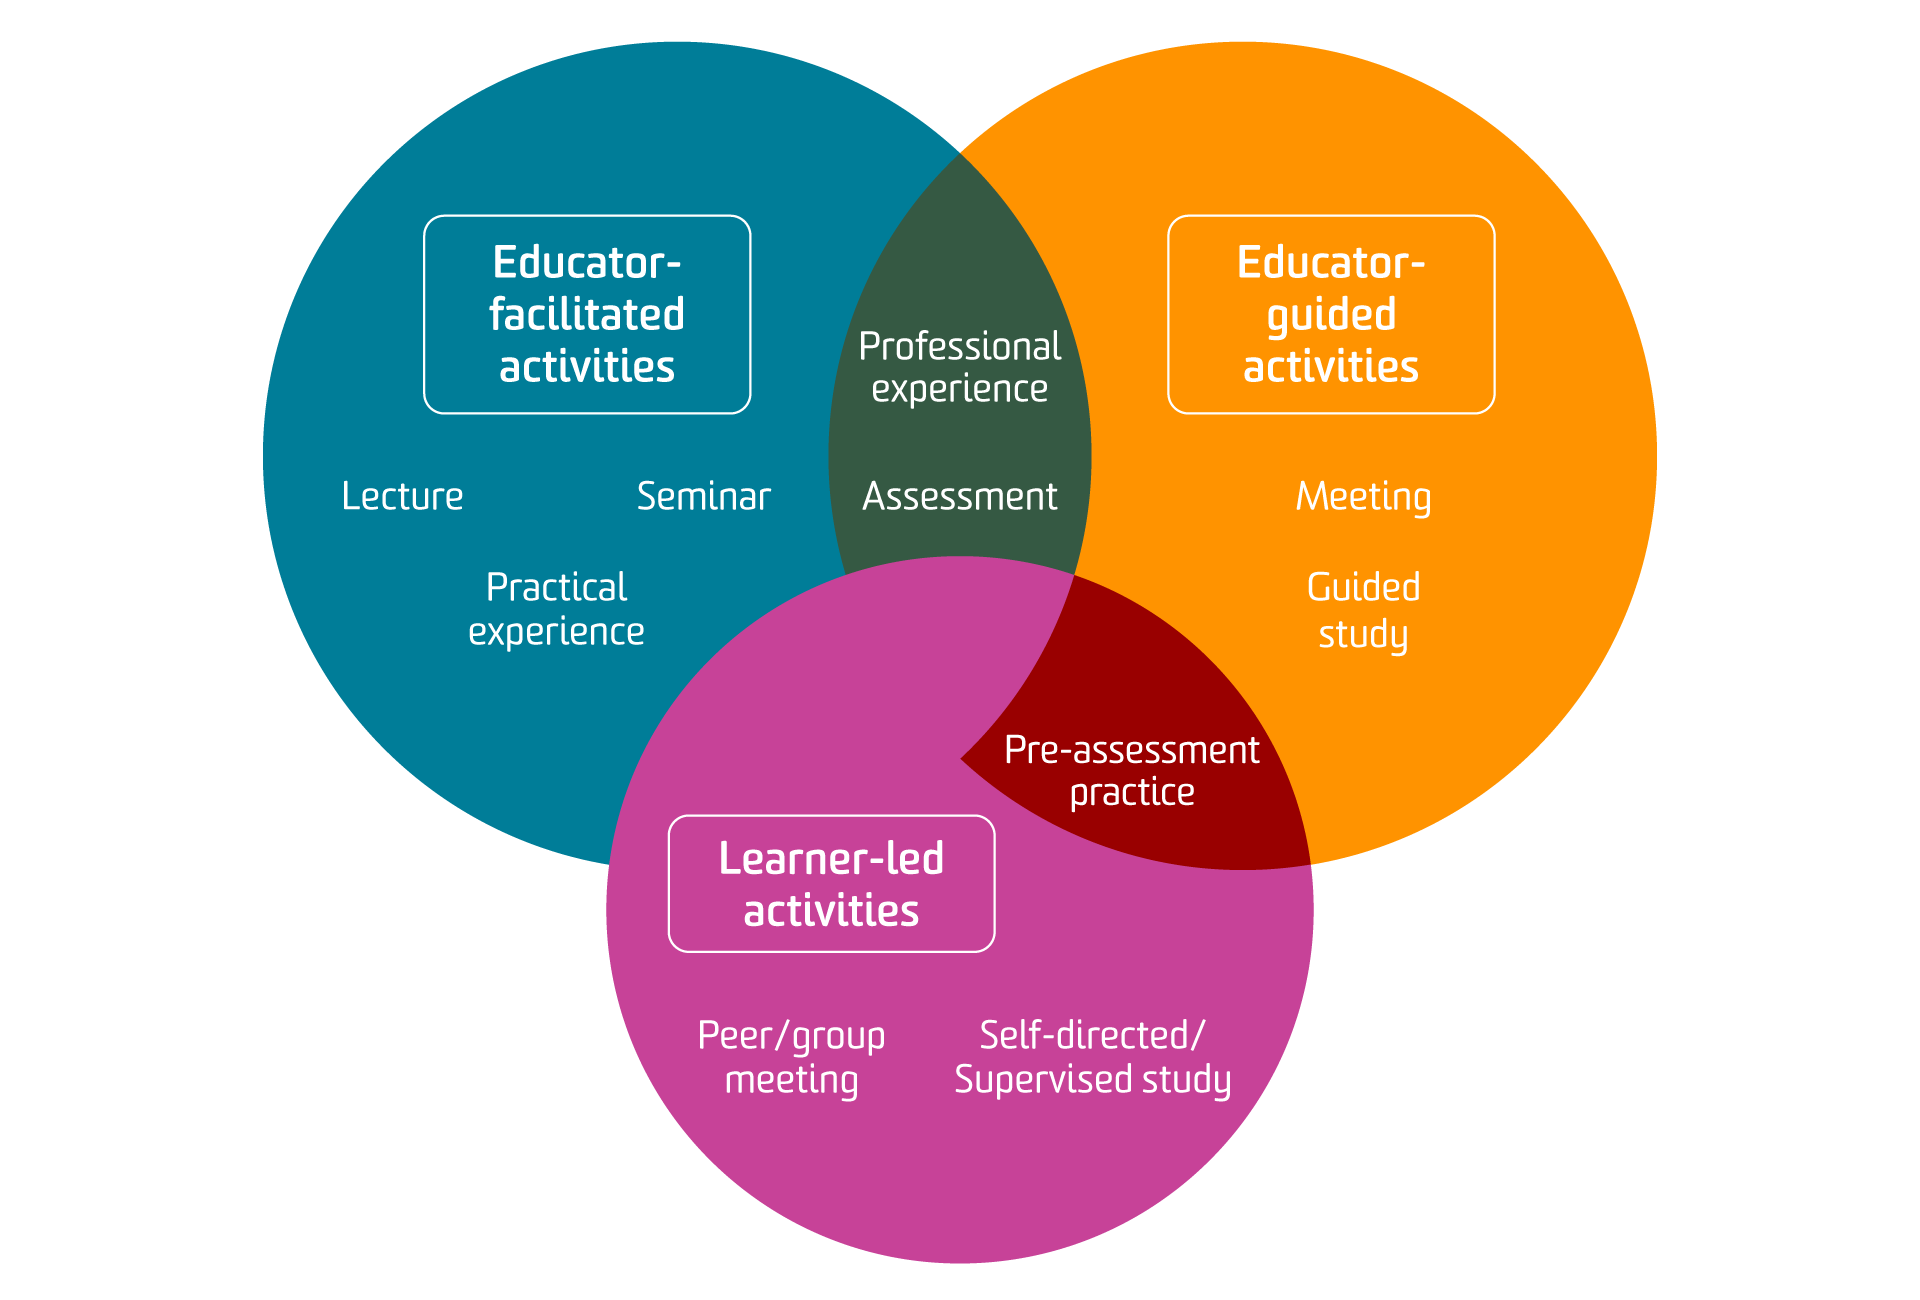 Figure 1: The revised categorisation of learning activities as educator-facilitated, educator-guided and learner-led activities.